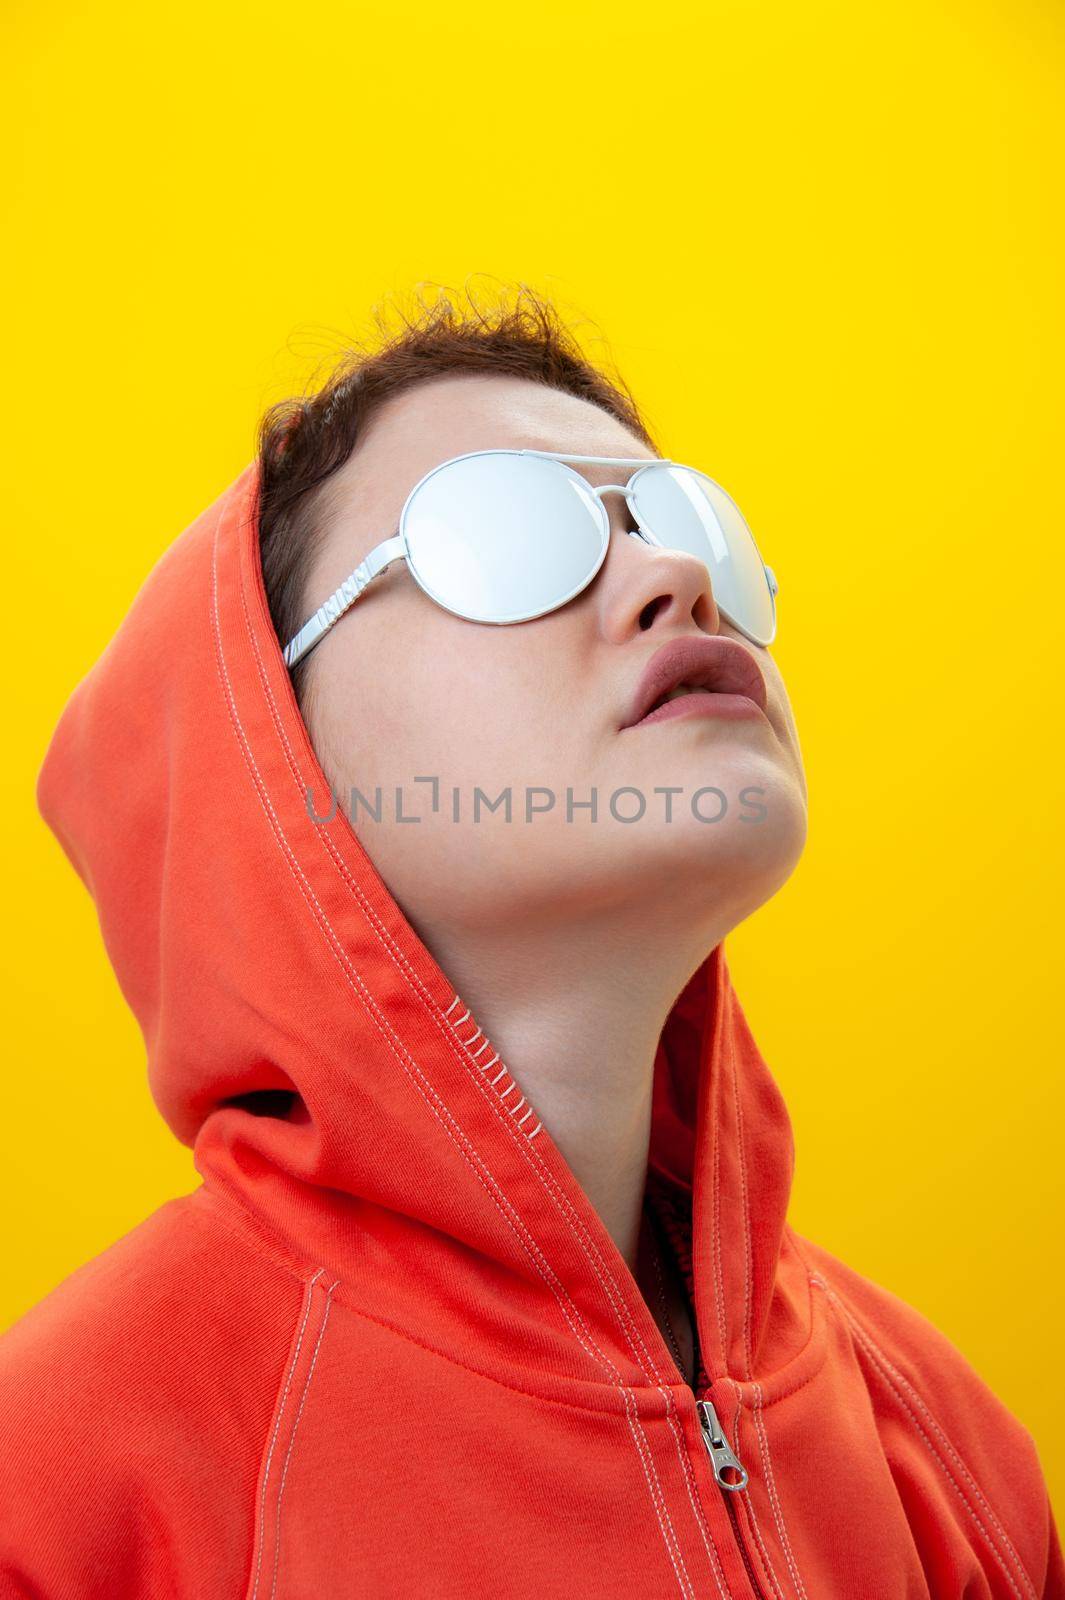 Alternative funky girl on a bright yellow background. Close up fashion portrait young beautiful woman in hoodie and white glasses. Unusual youth fashion concept. Hot image.